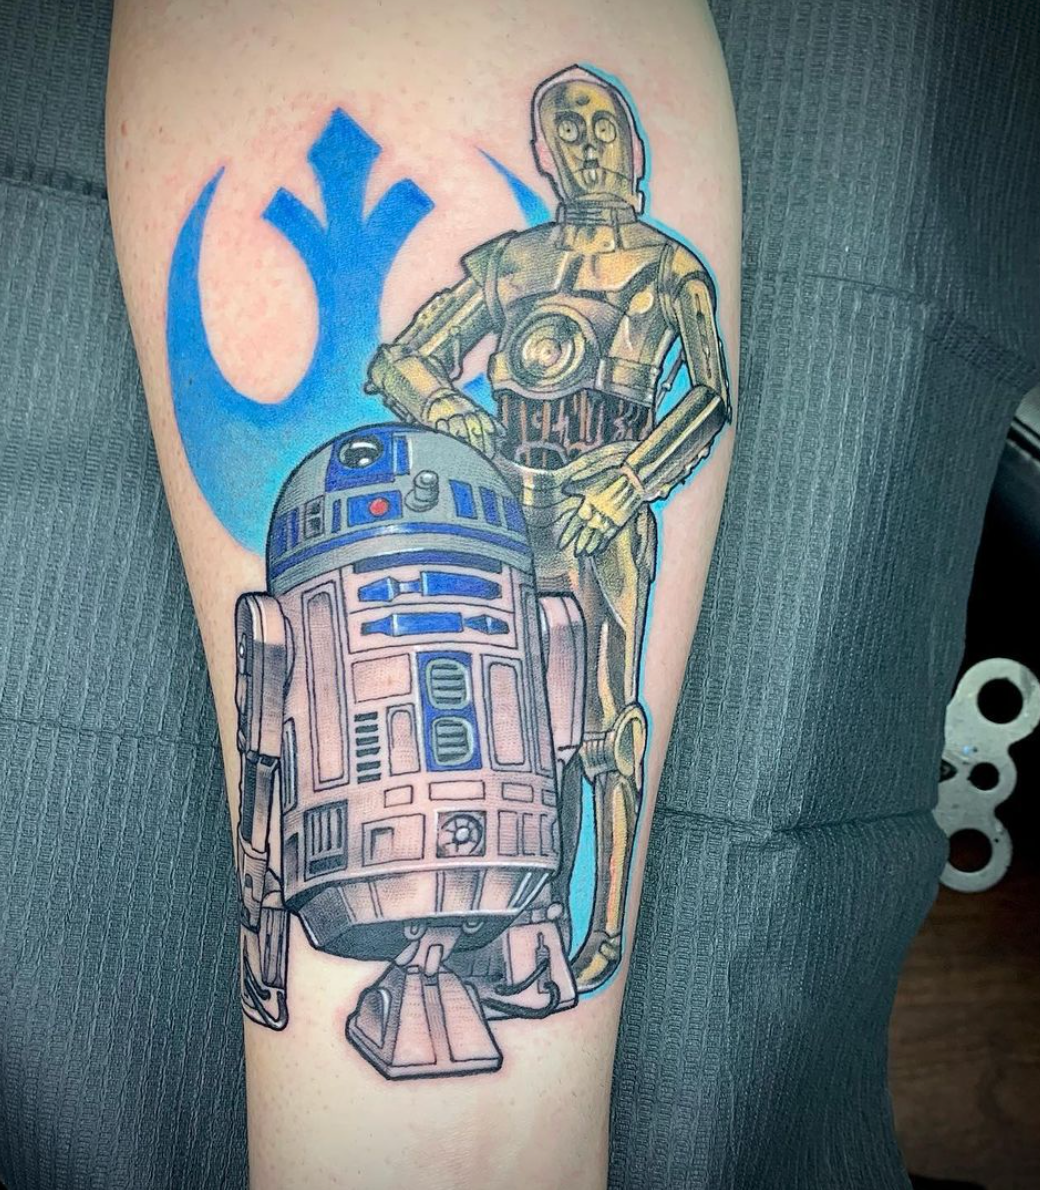 R2-D2 and C3P0 in front of the rebel symbol